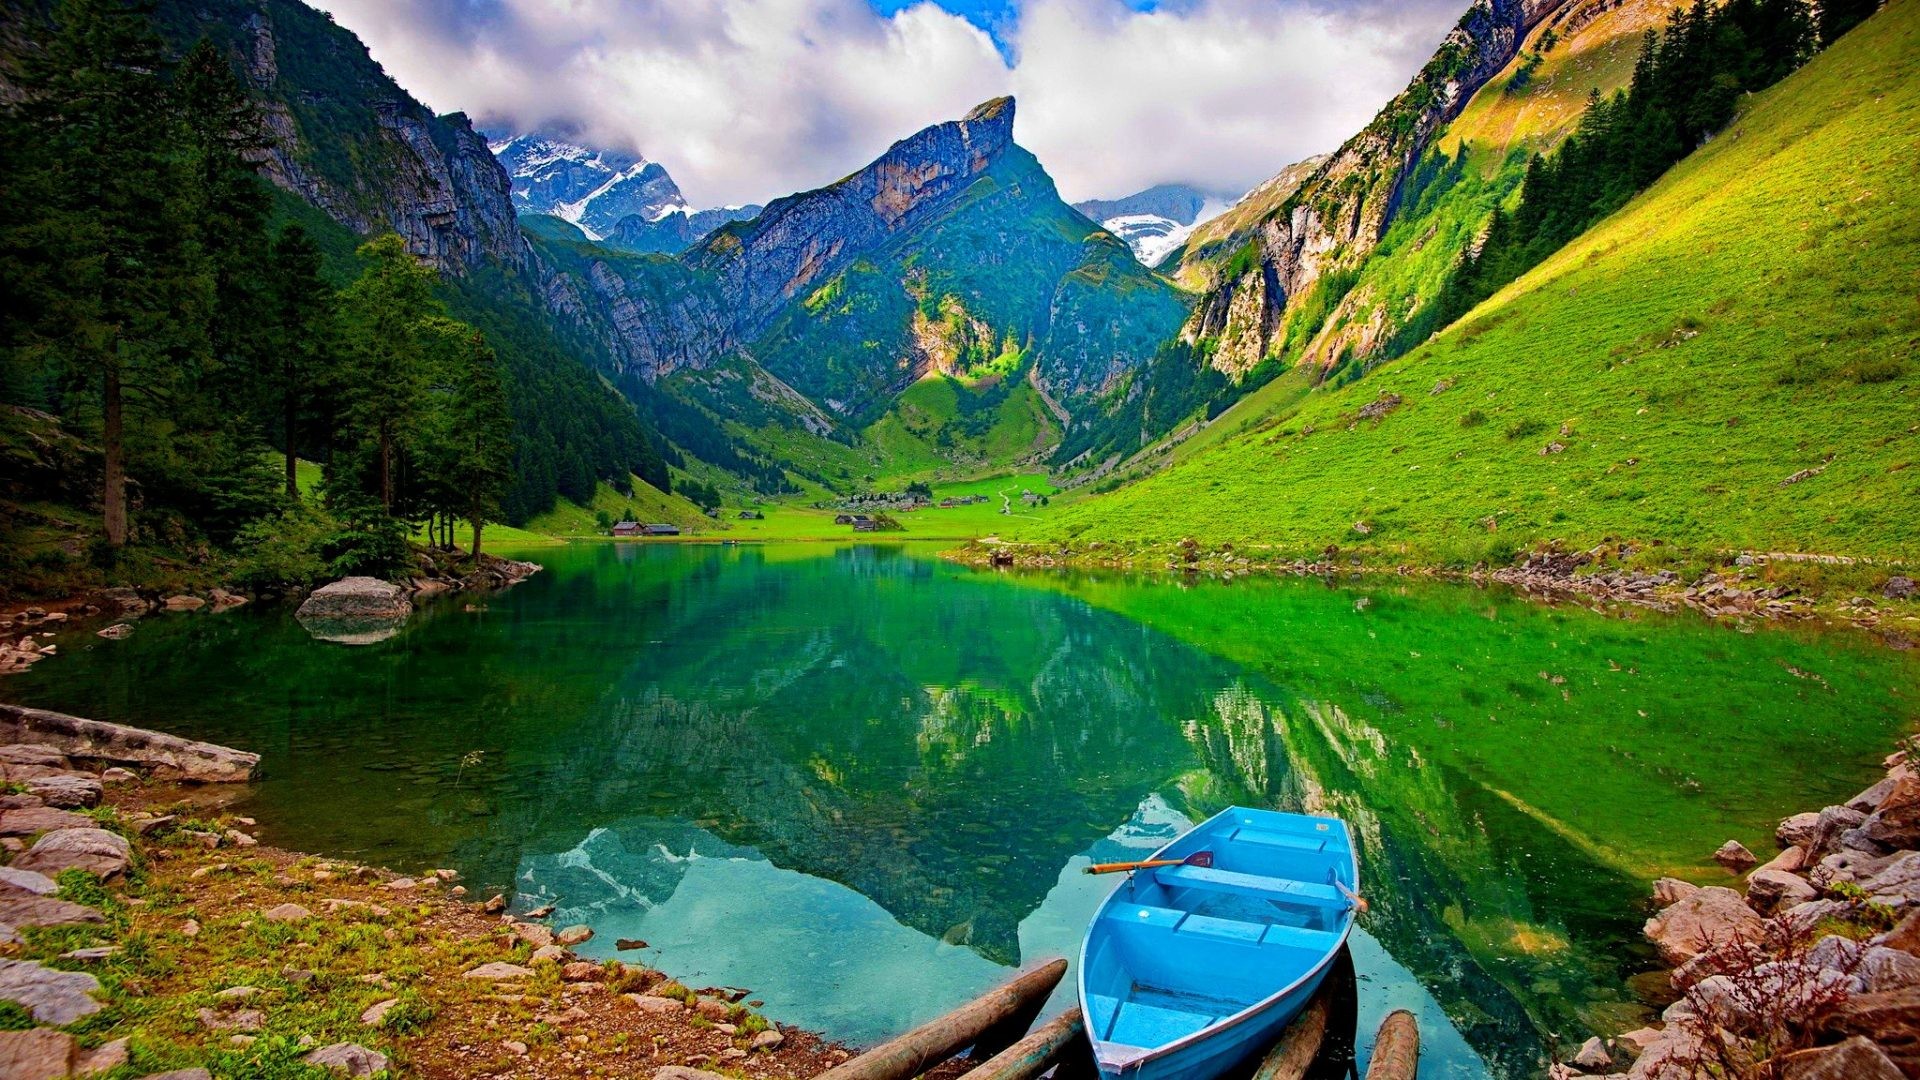 1920x1080 Lakes - Lonely Boat Mountain Lake Hills Emerald Grass Slopes Clear  Lakeshore Sky Nice Summer Nature